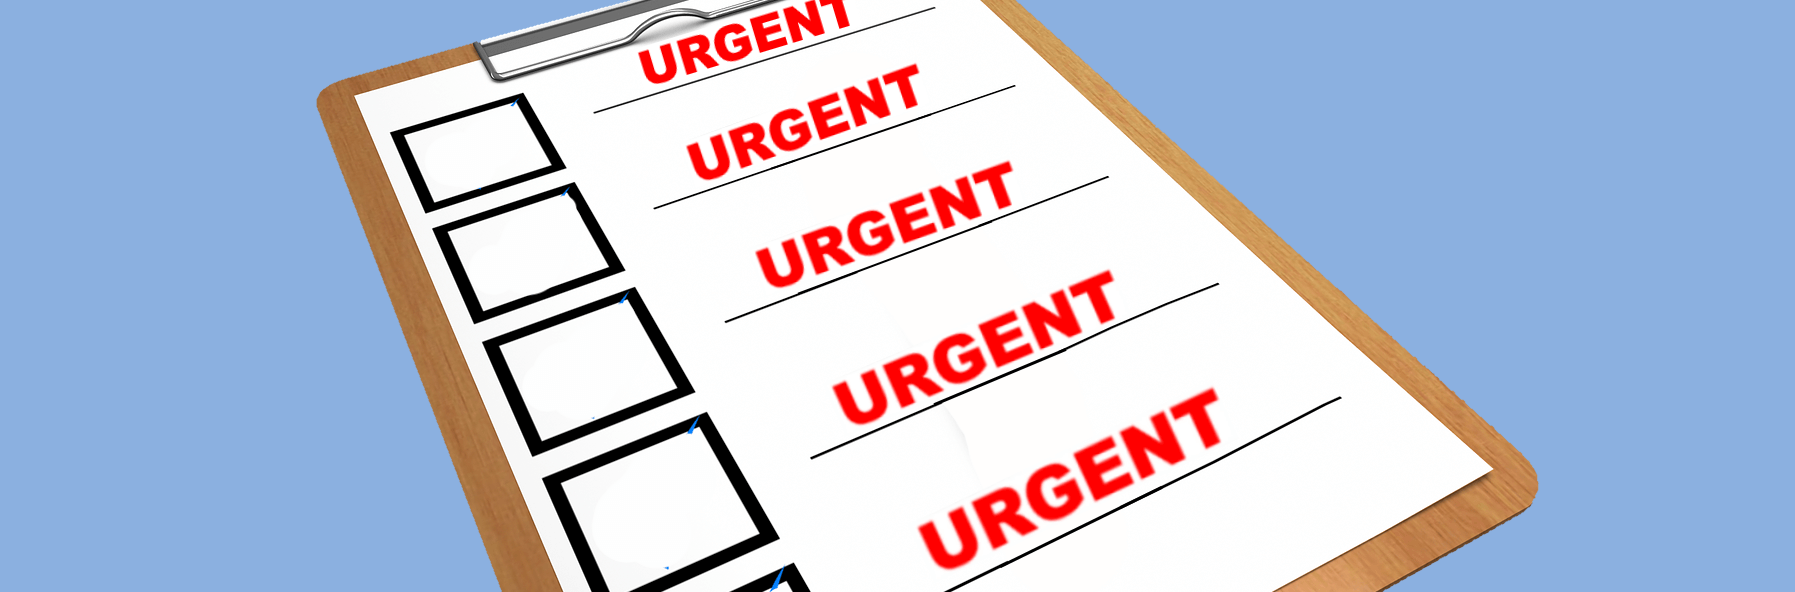 A checklist filed with urgent tasks